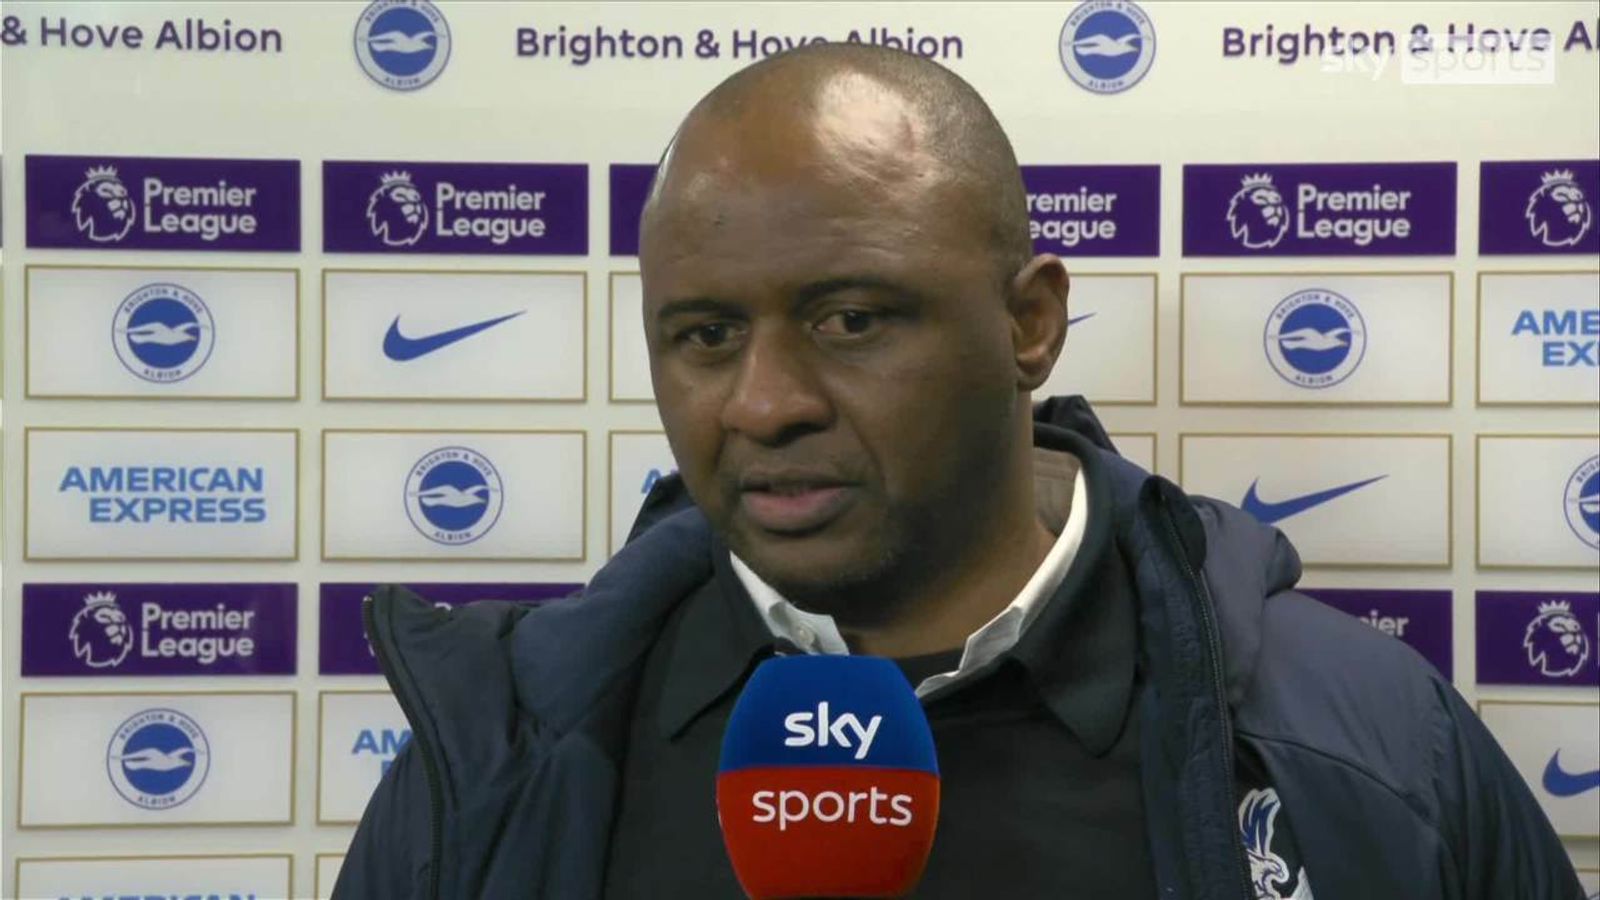 Defensive display pleases Patrick Vieira after draw at rivals Brighton ...